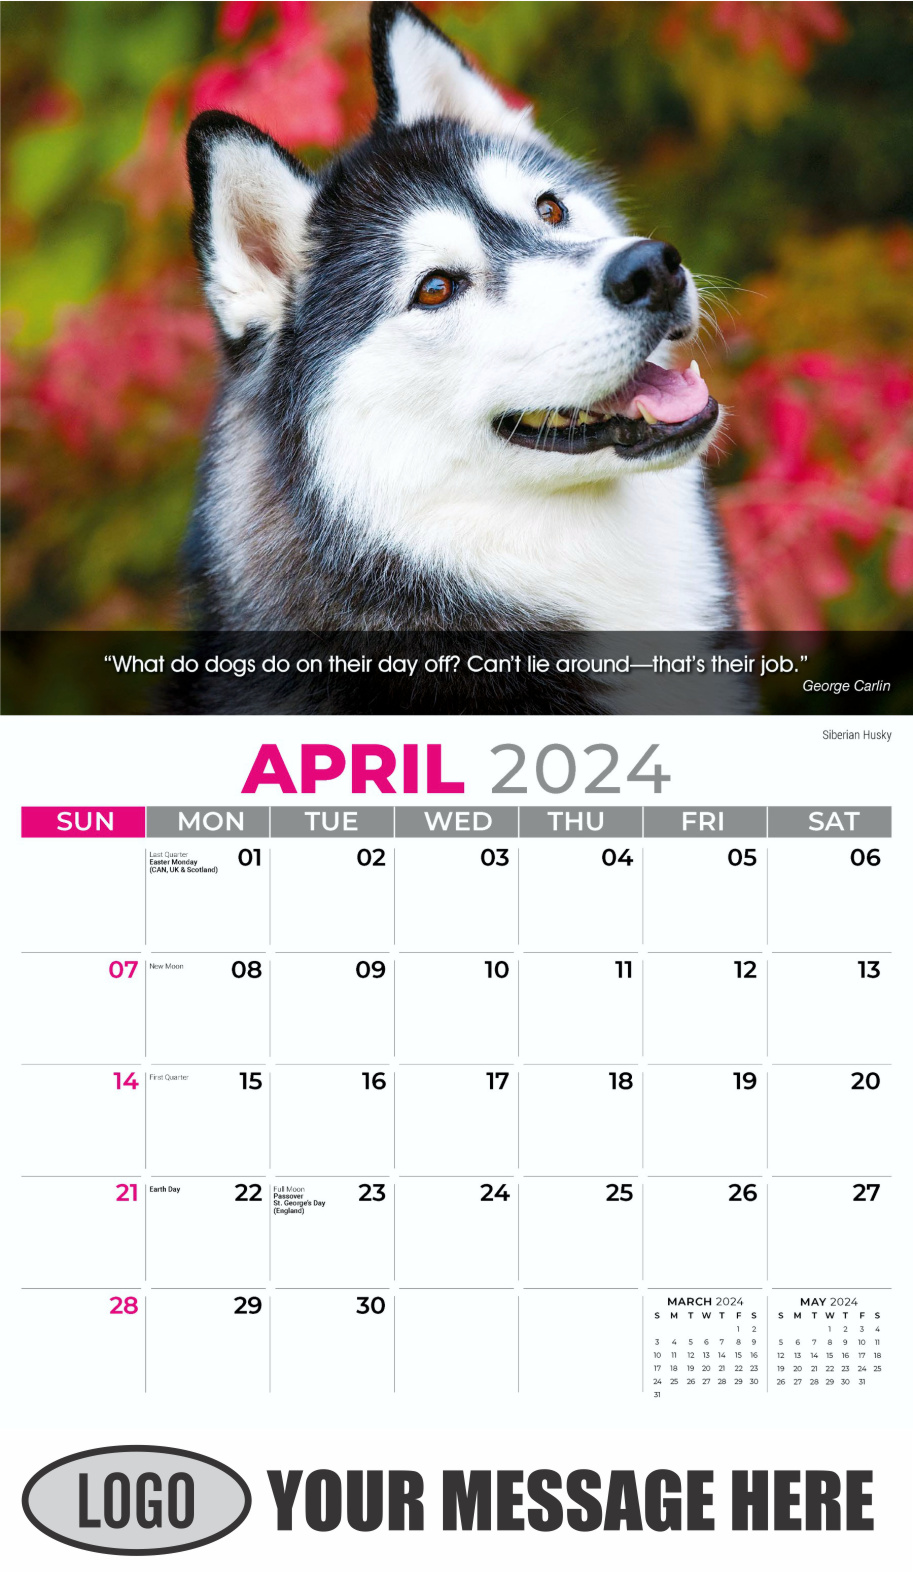 Dogs 2024 Vets and Pets Business Promotion Calendar - April